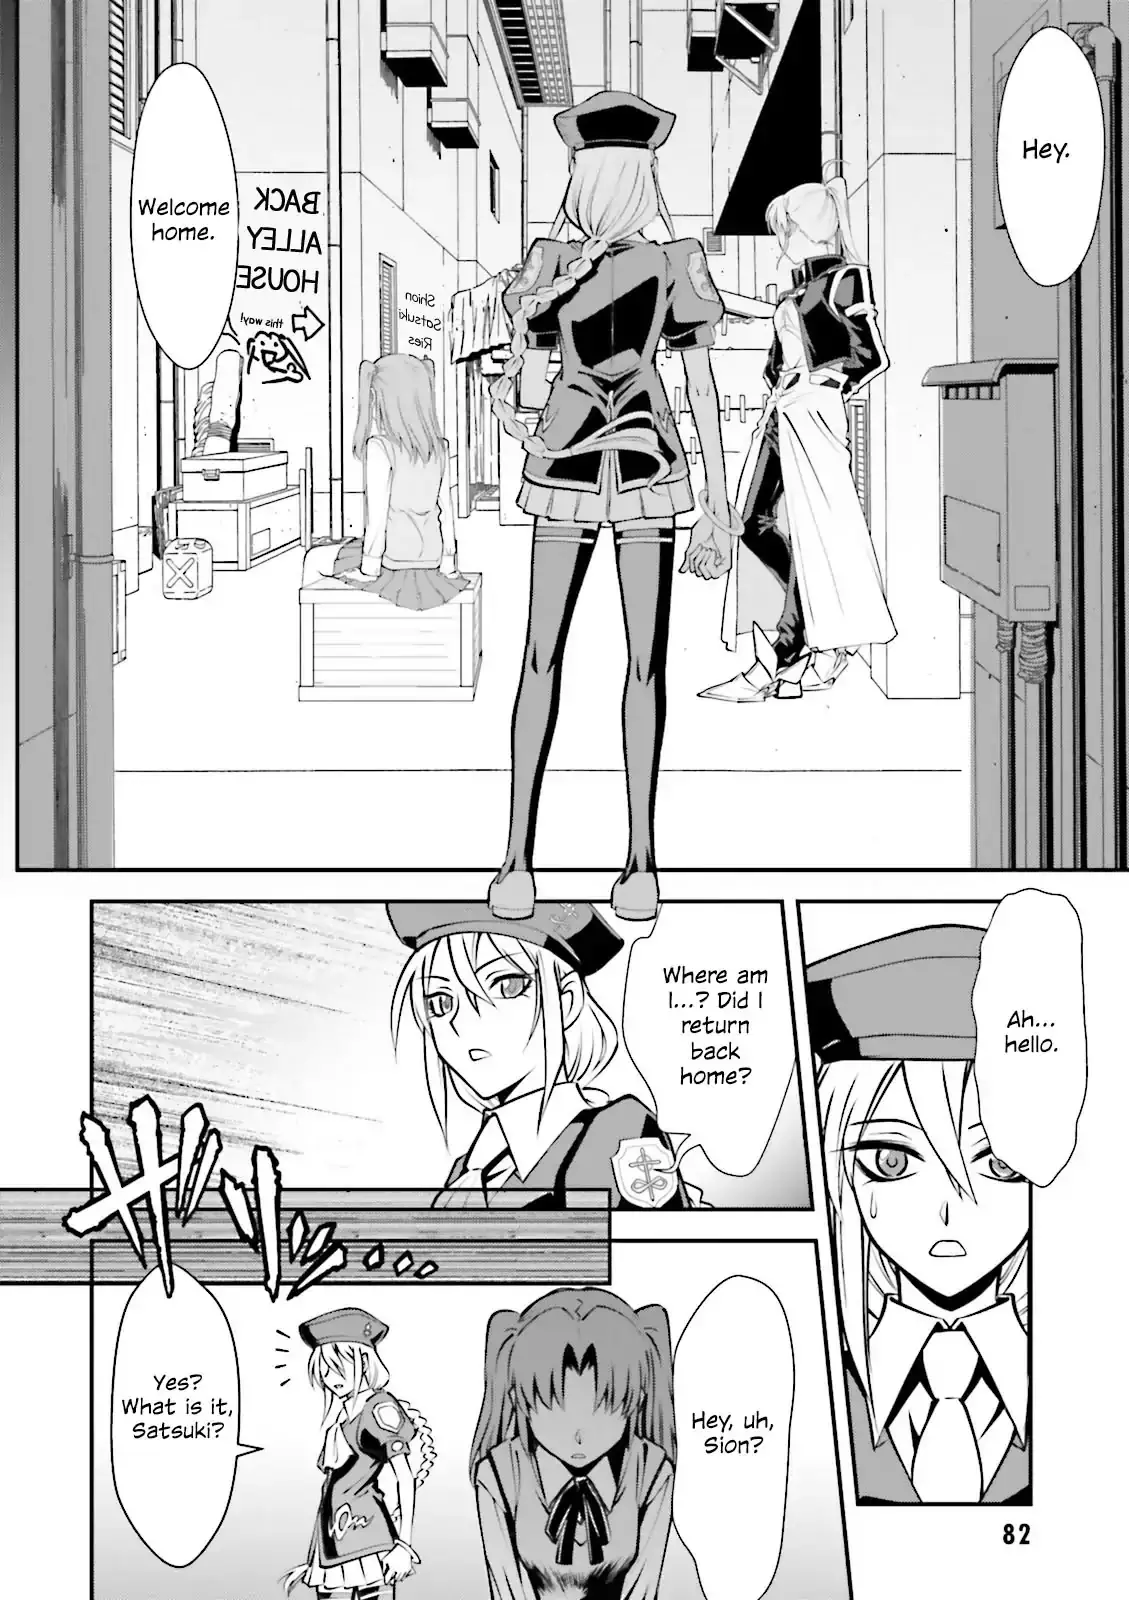 Melty Blood - Back Alley Alliance Nightmare - 2 page 32